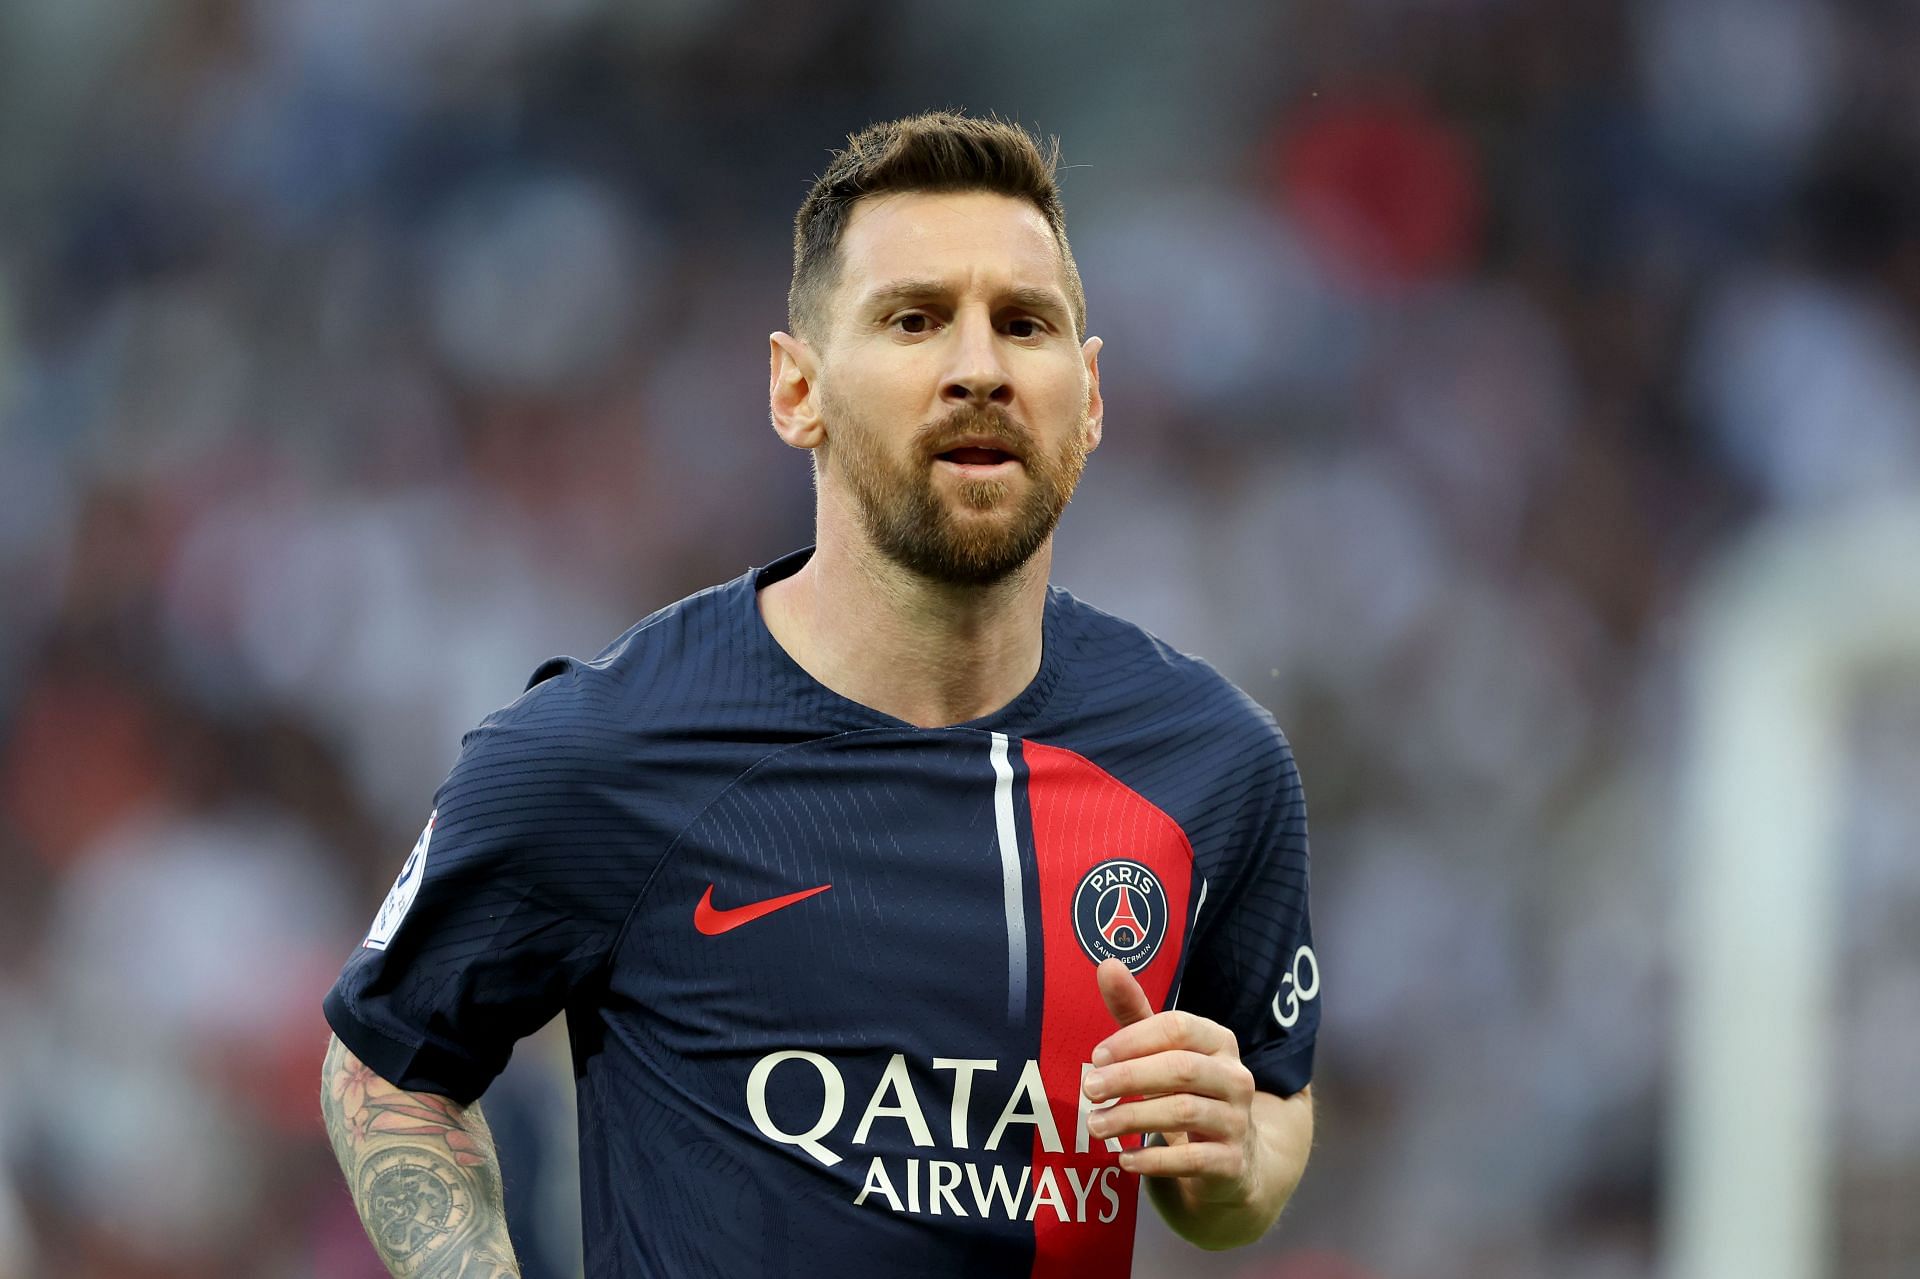 Messi left the Ligue 1 side for Inter Miami in the MLS.